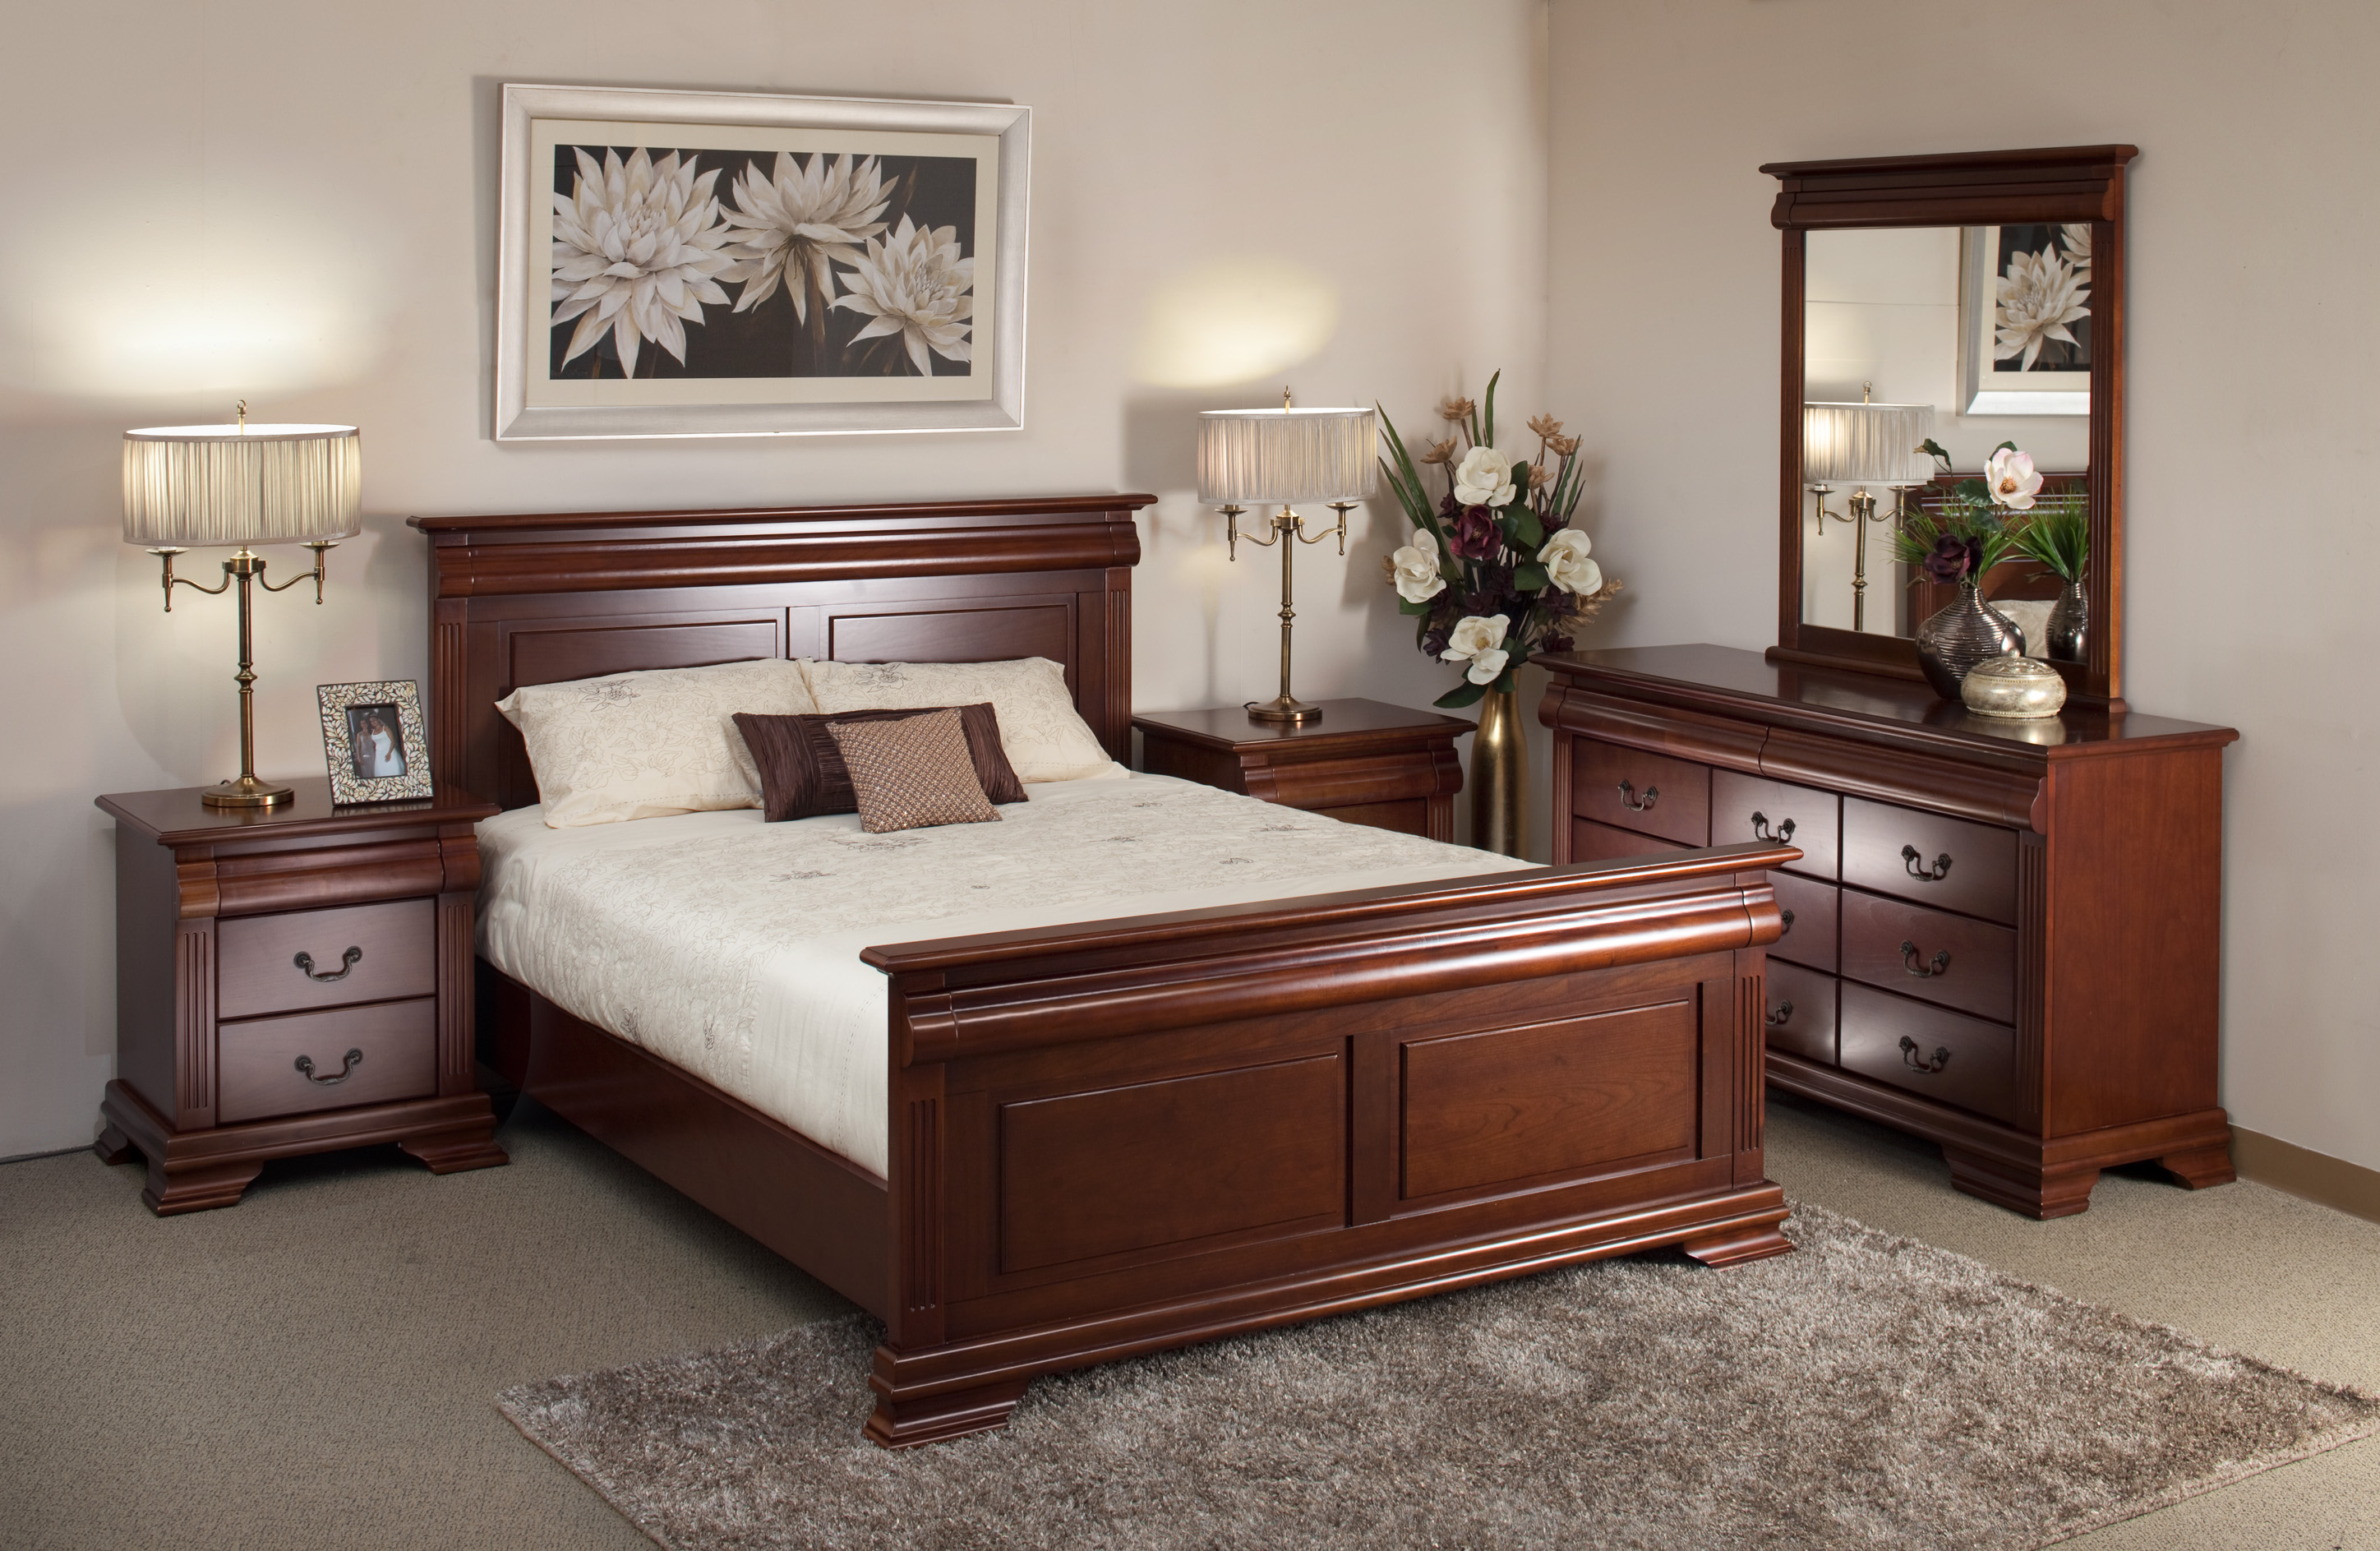 The Nigerian Furniture Market A General Overview